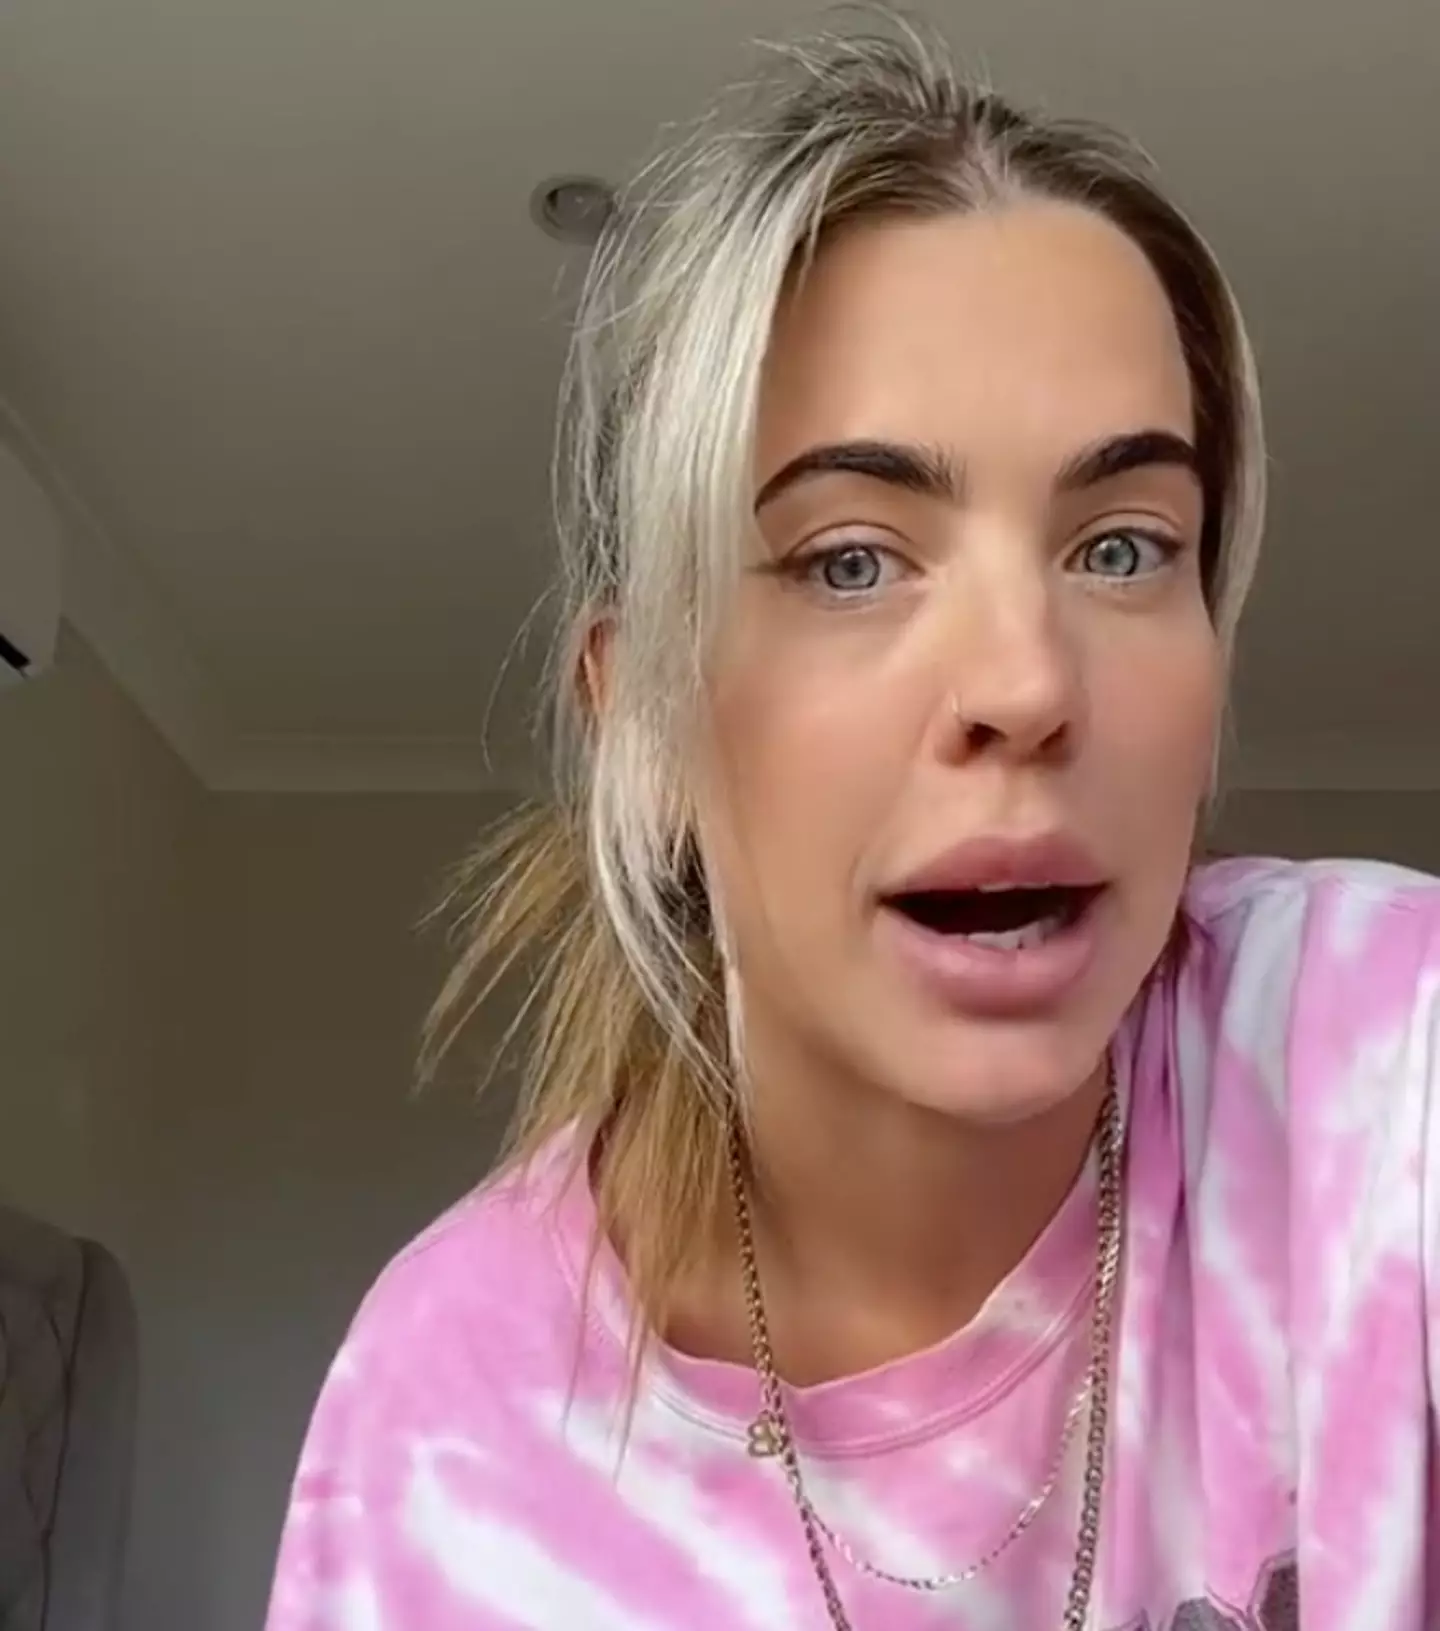 Billie has urged people not to judge OnlyFans models on what they do, and that they aren't much different to normal people.